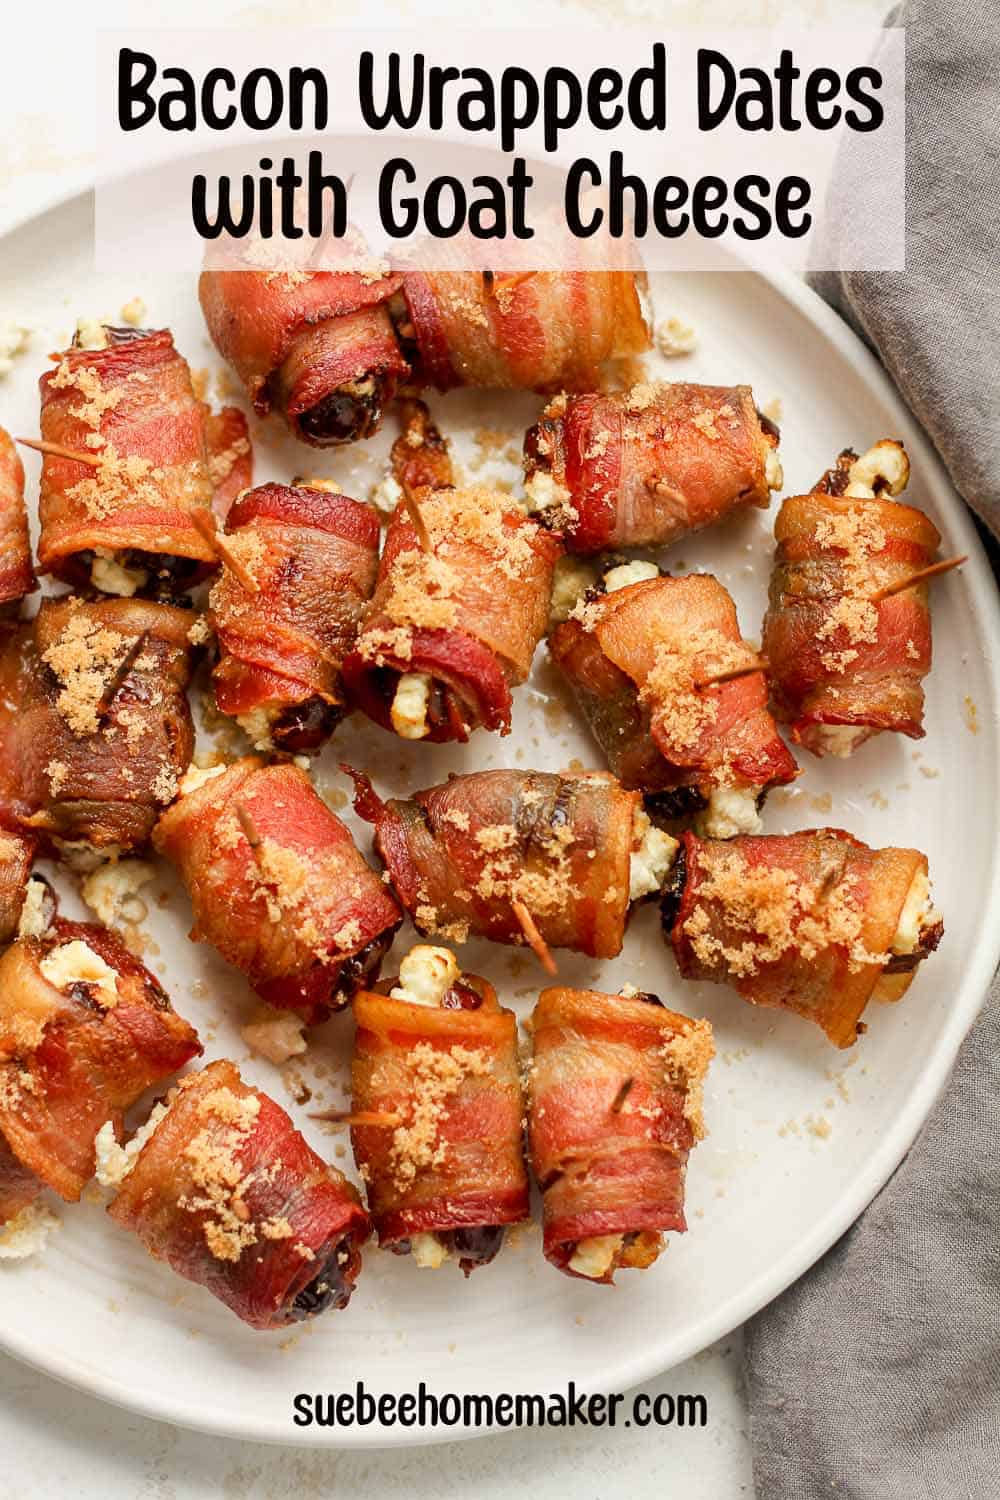 A plate of bacon wrapped dates with goat cheese, with a sprinkle of brown sugar.